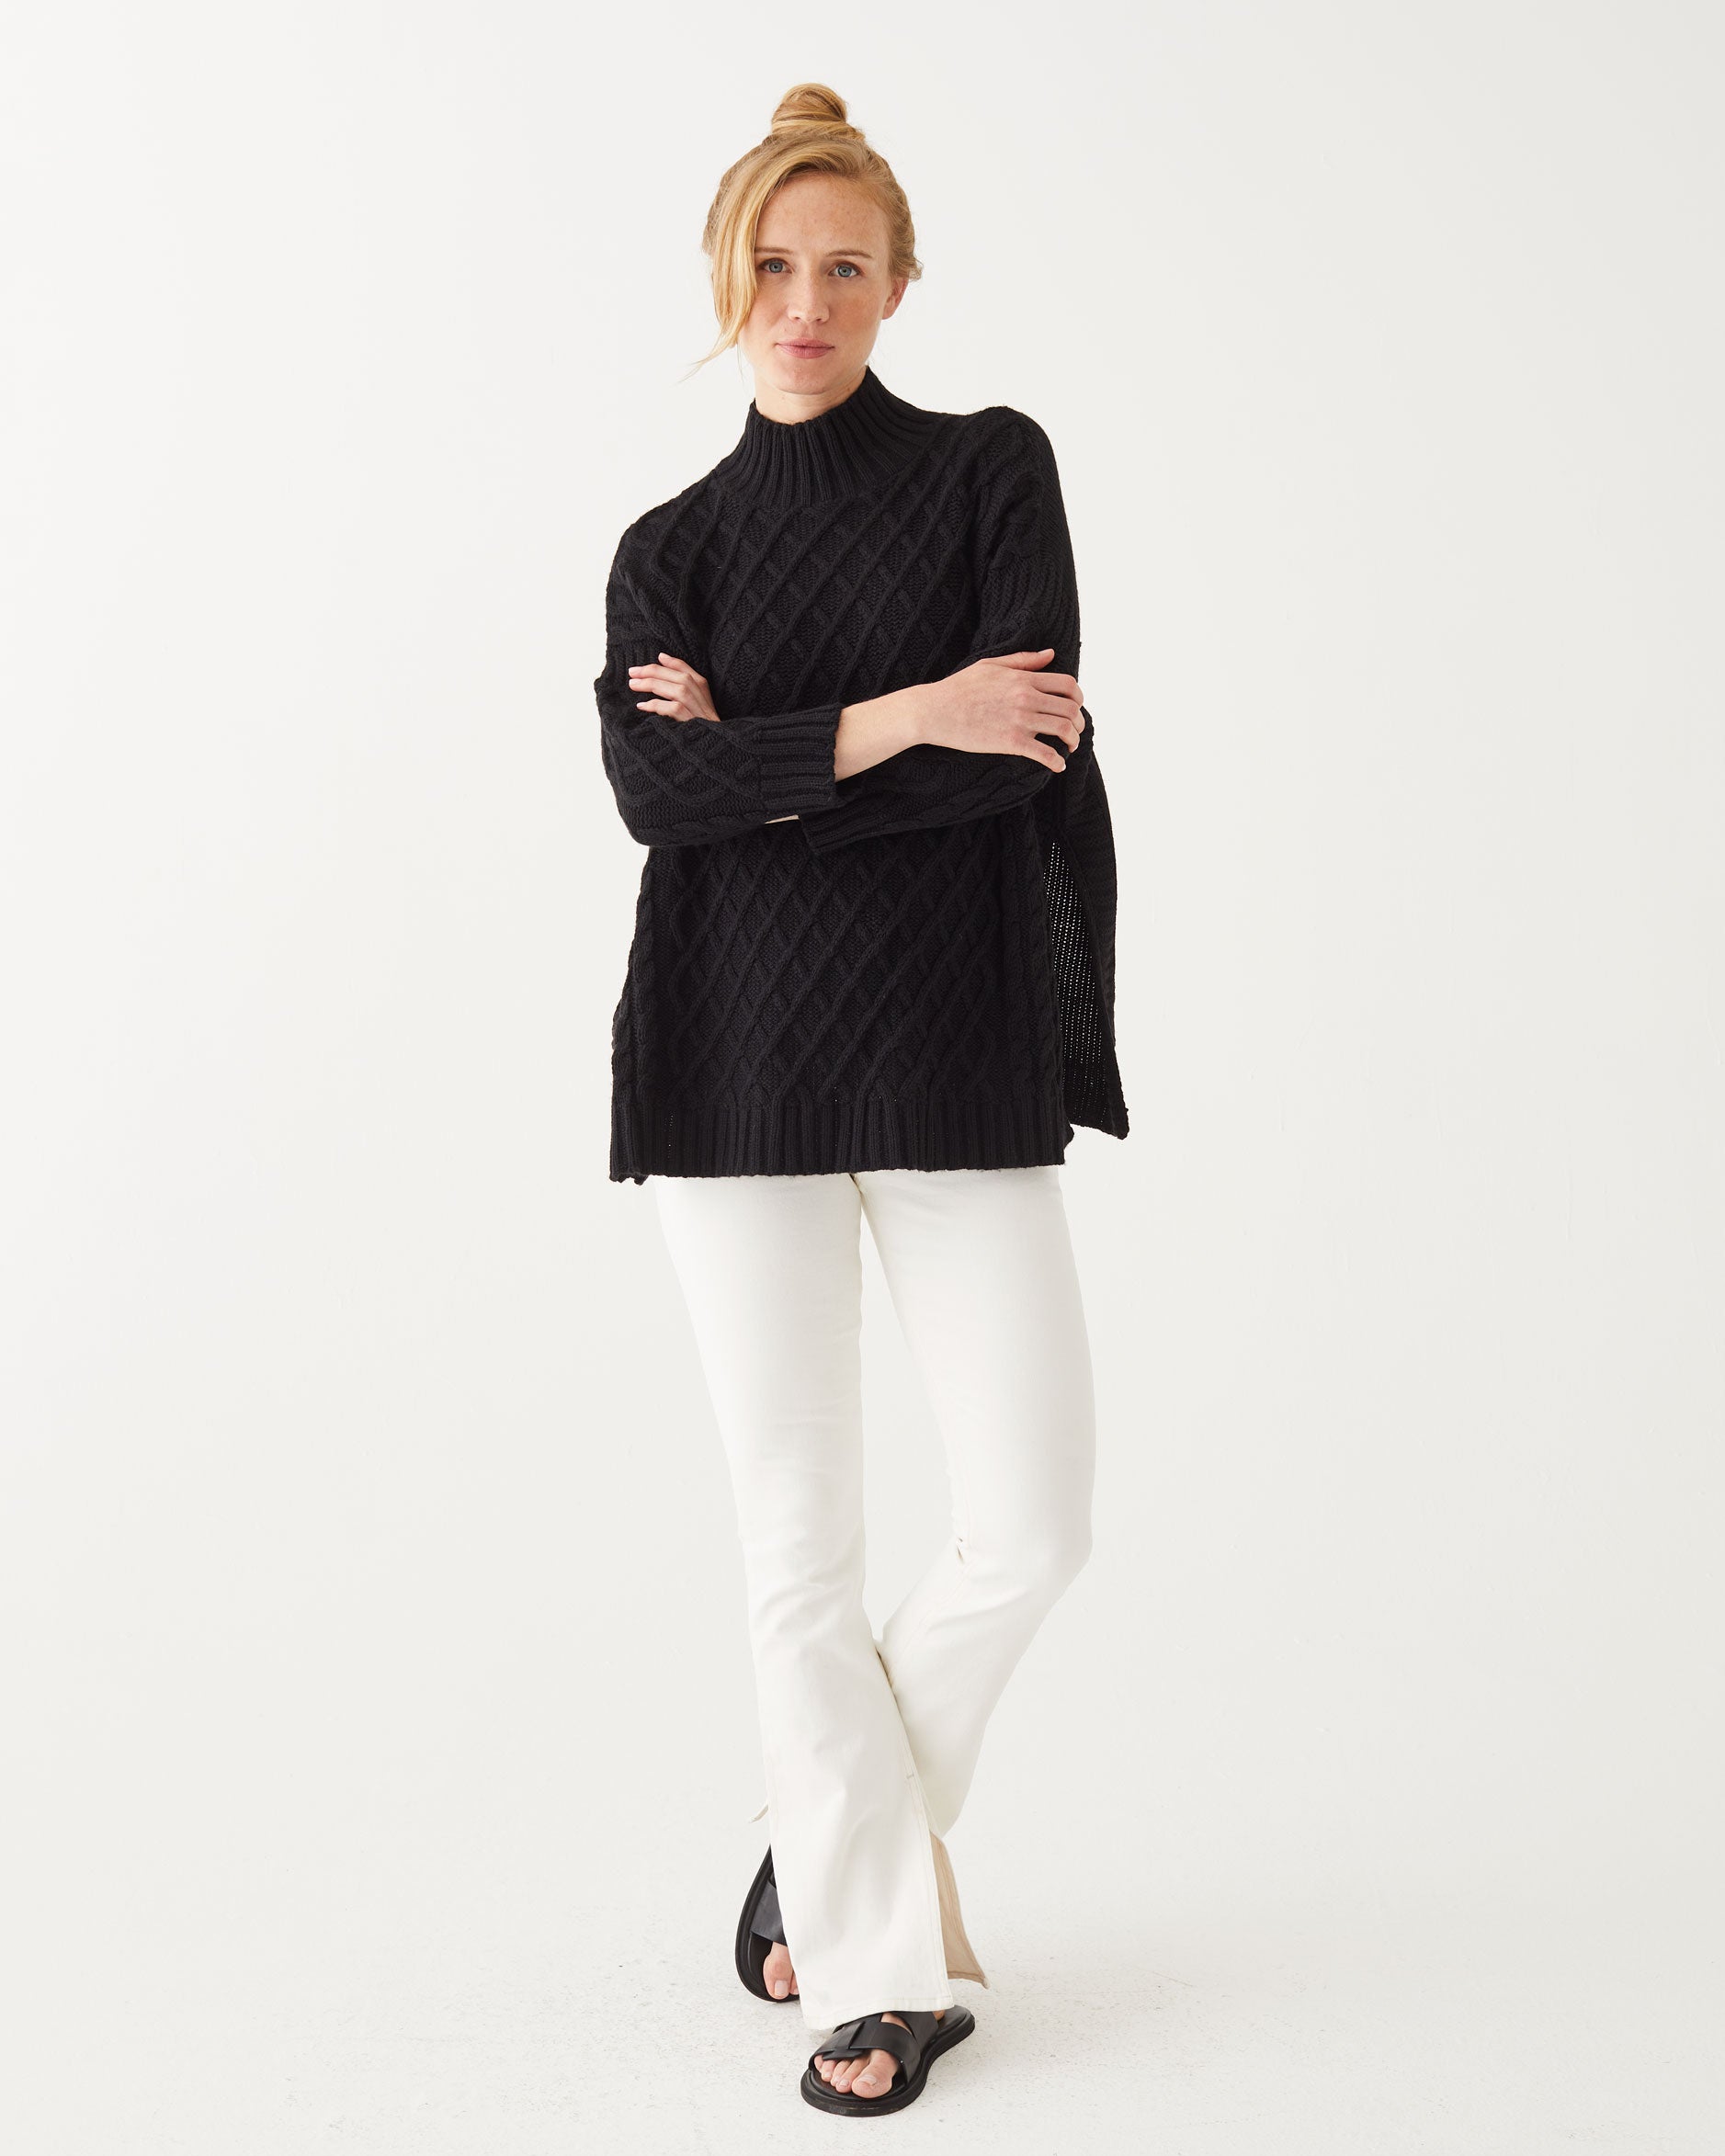 strawberry blonde female wearing black sweater standing with arms crossed on a white background